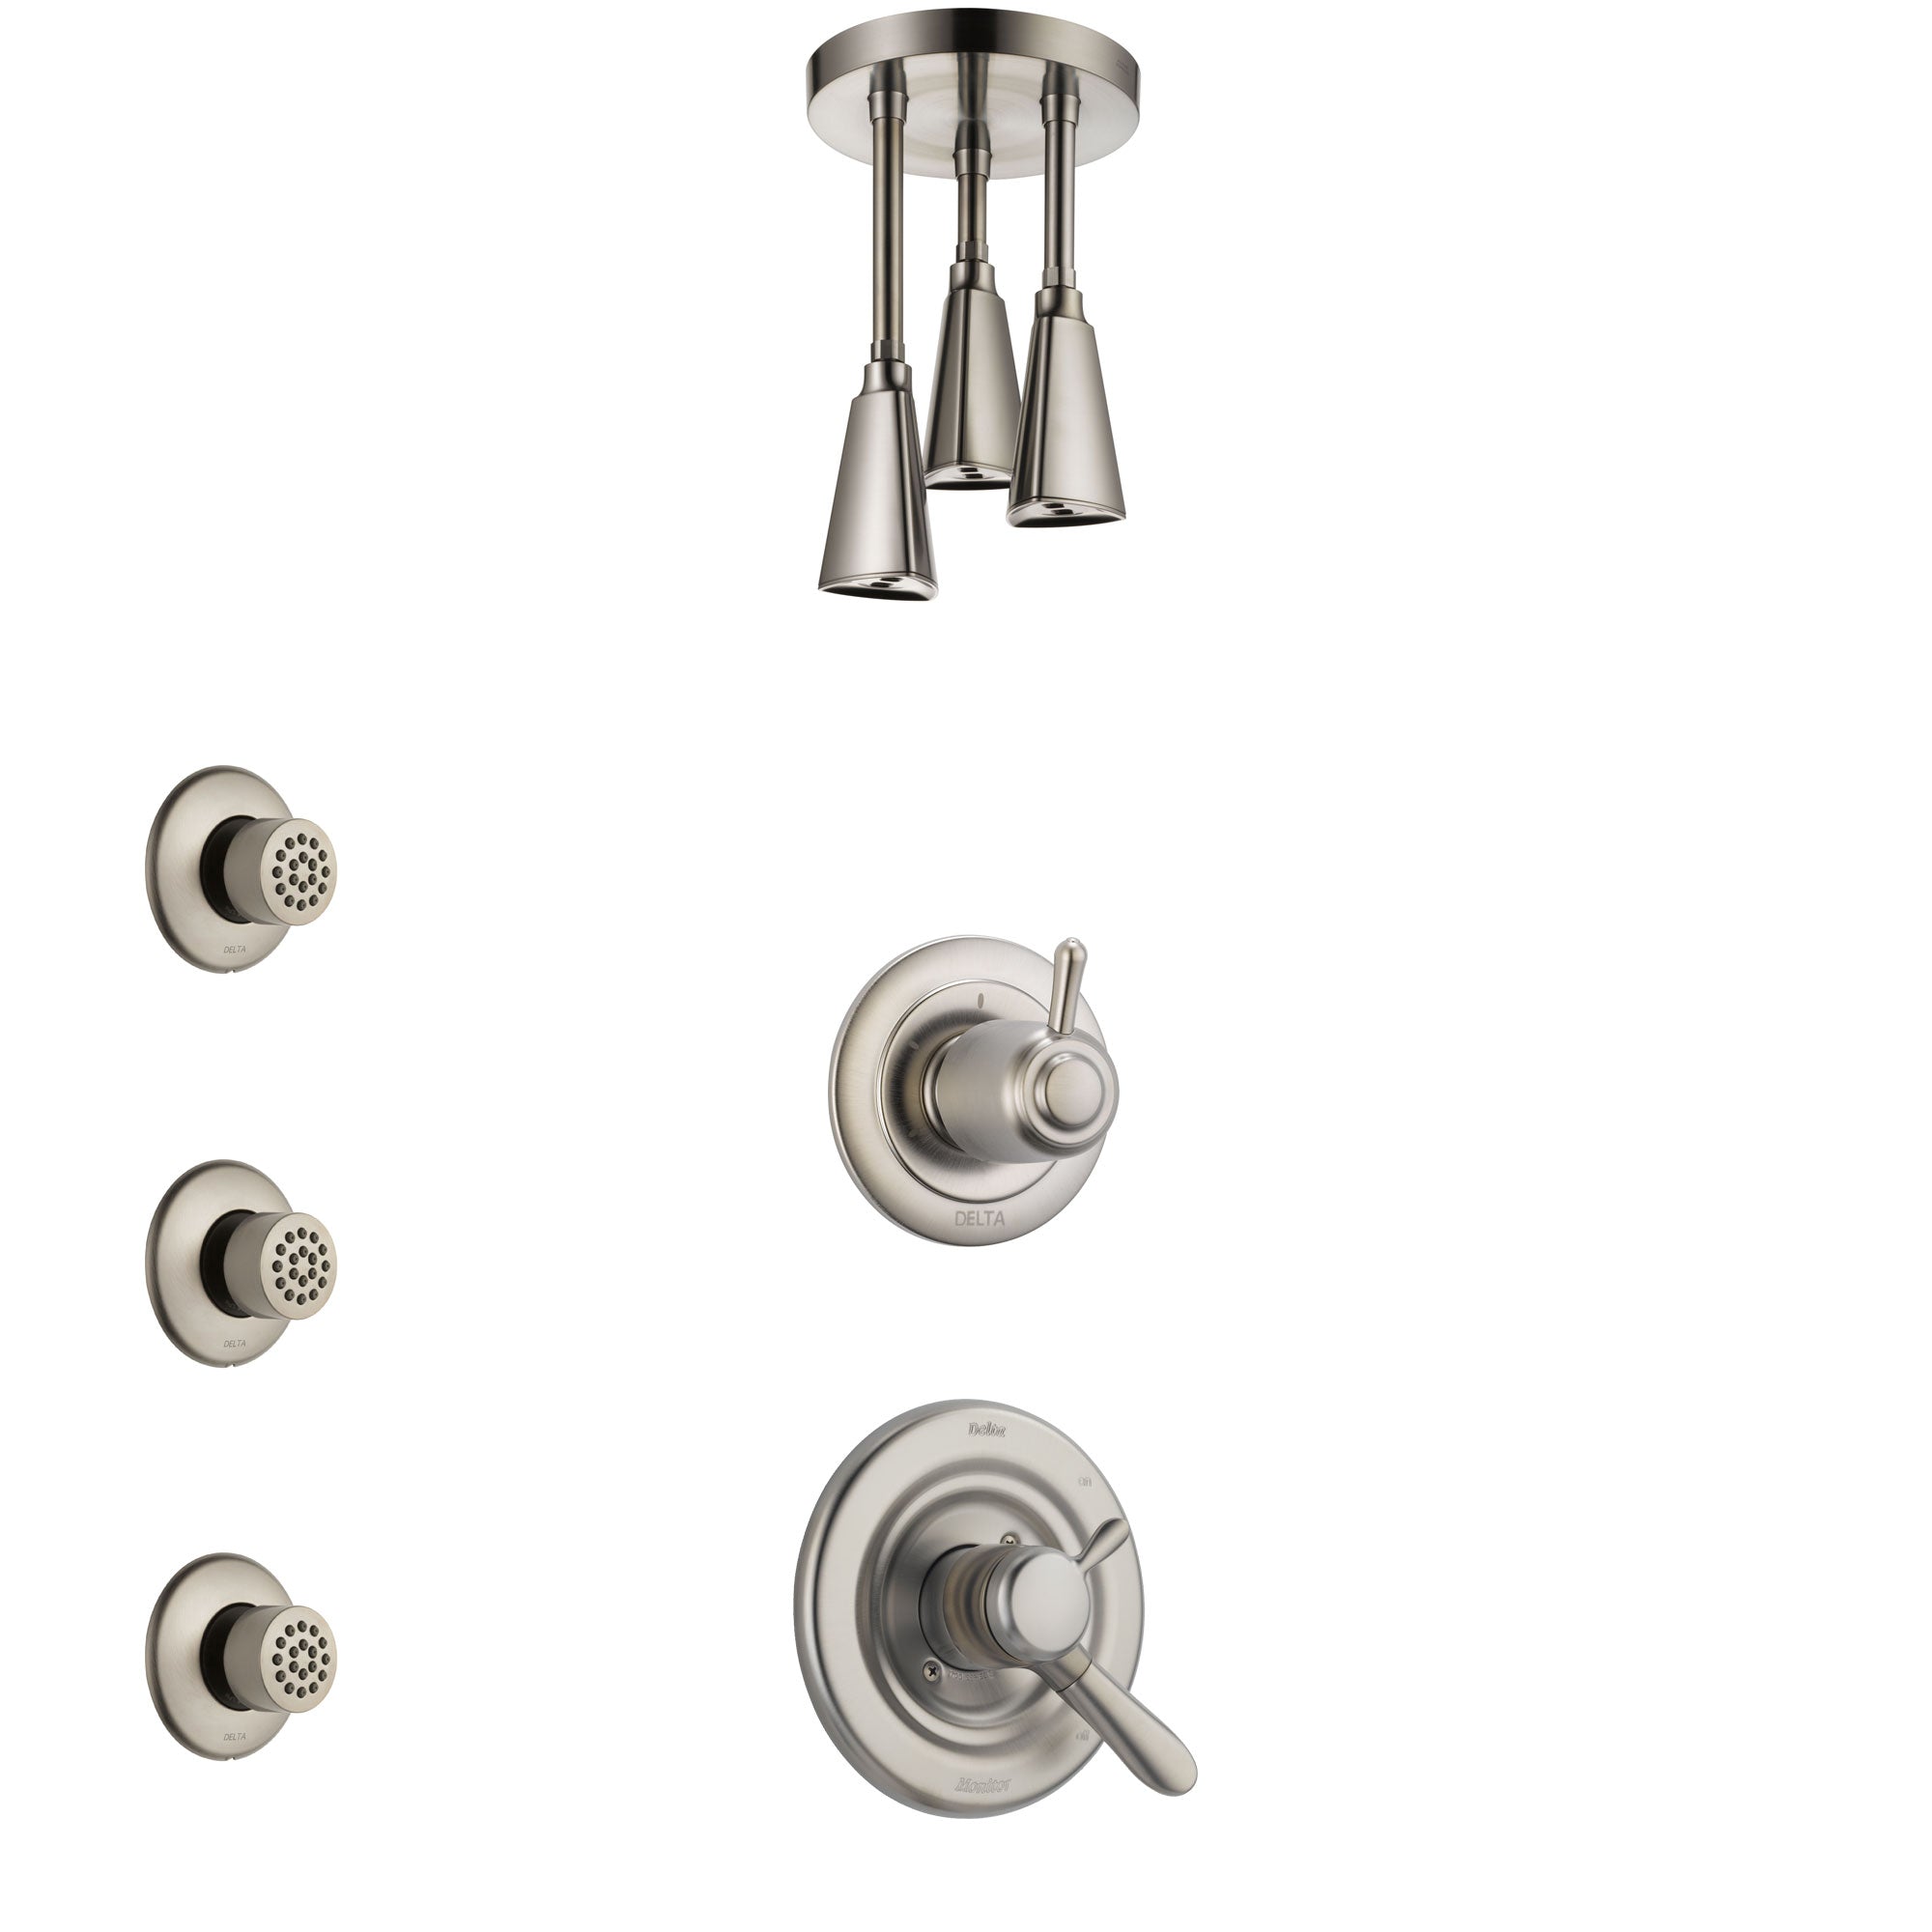 Delta Lahara Stainless Steel Finish Shower System with Dual Control Handle, 3-Setting Diverter, Ceiling Mount Showerhead, and 3 Body Sprays SS1738SS8